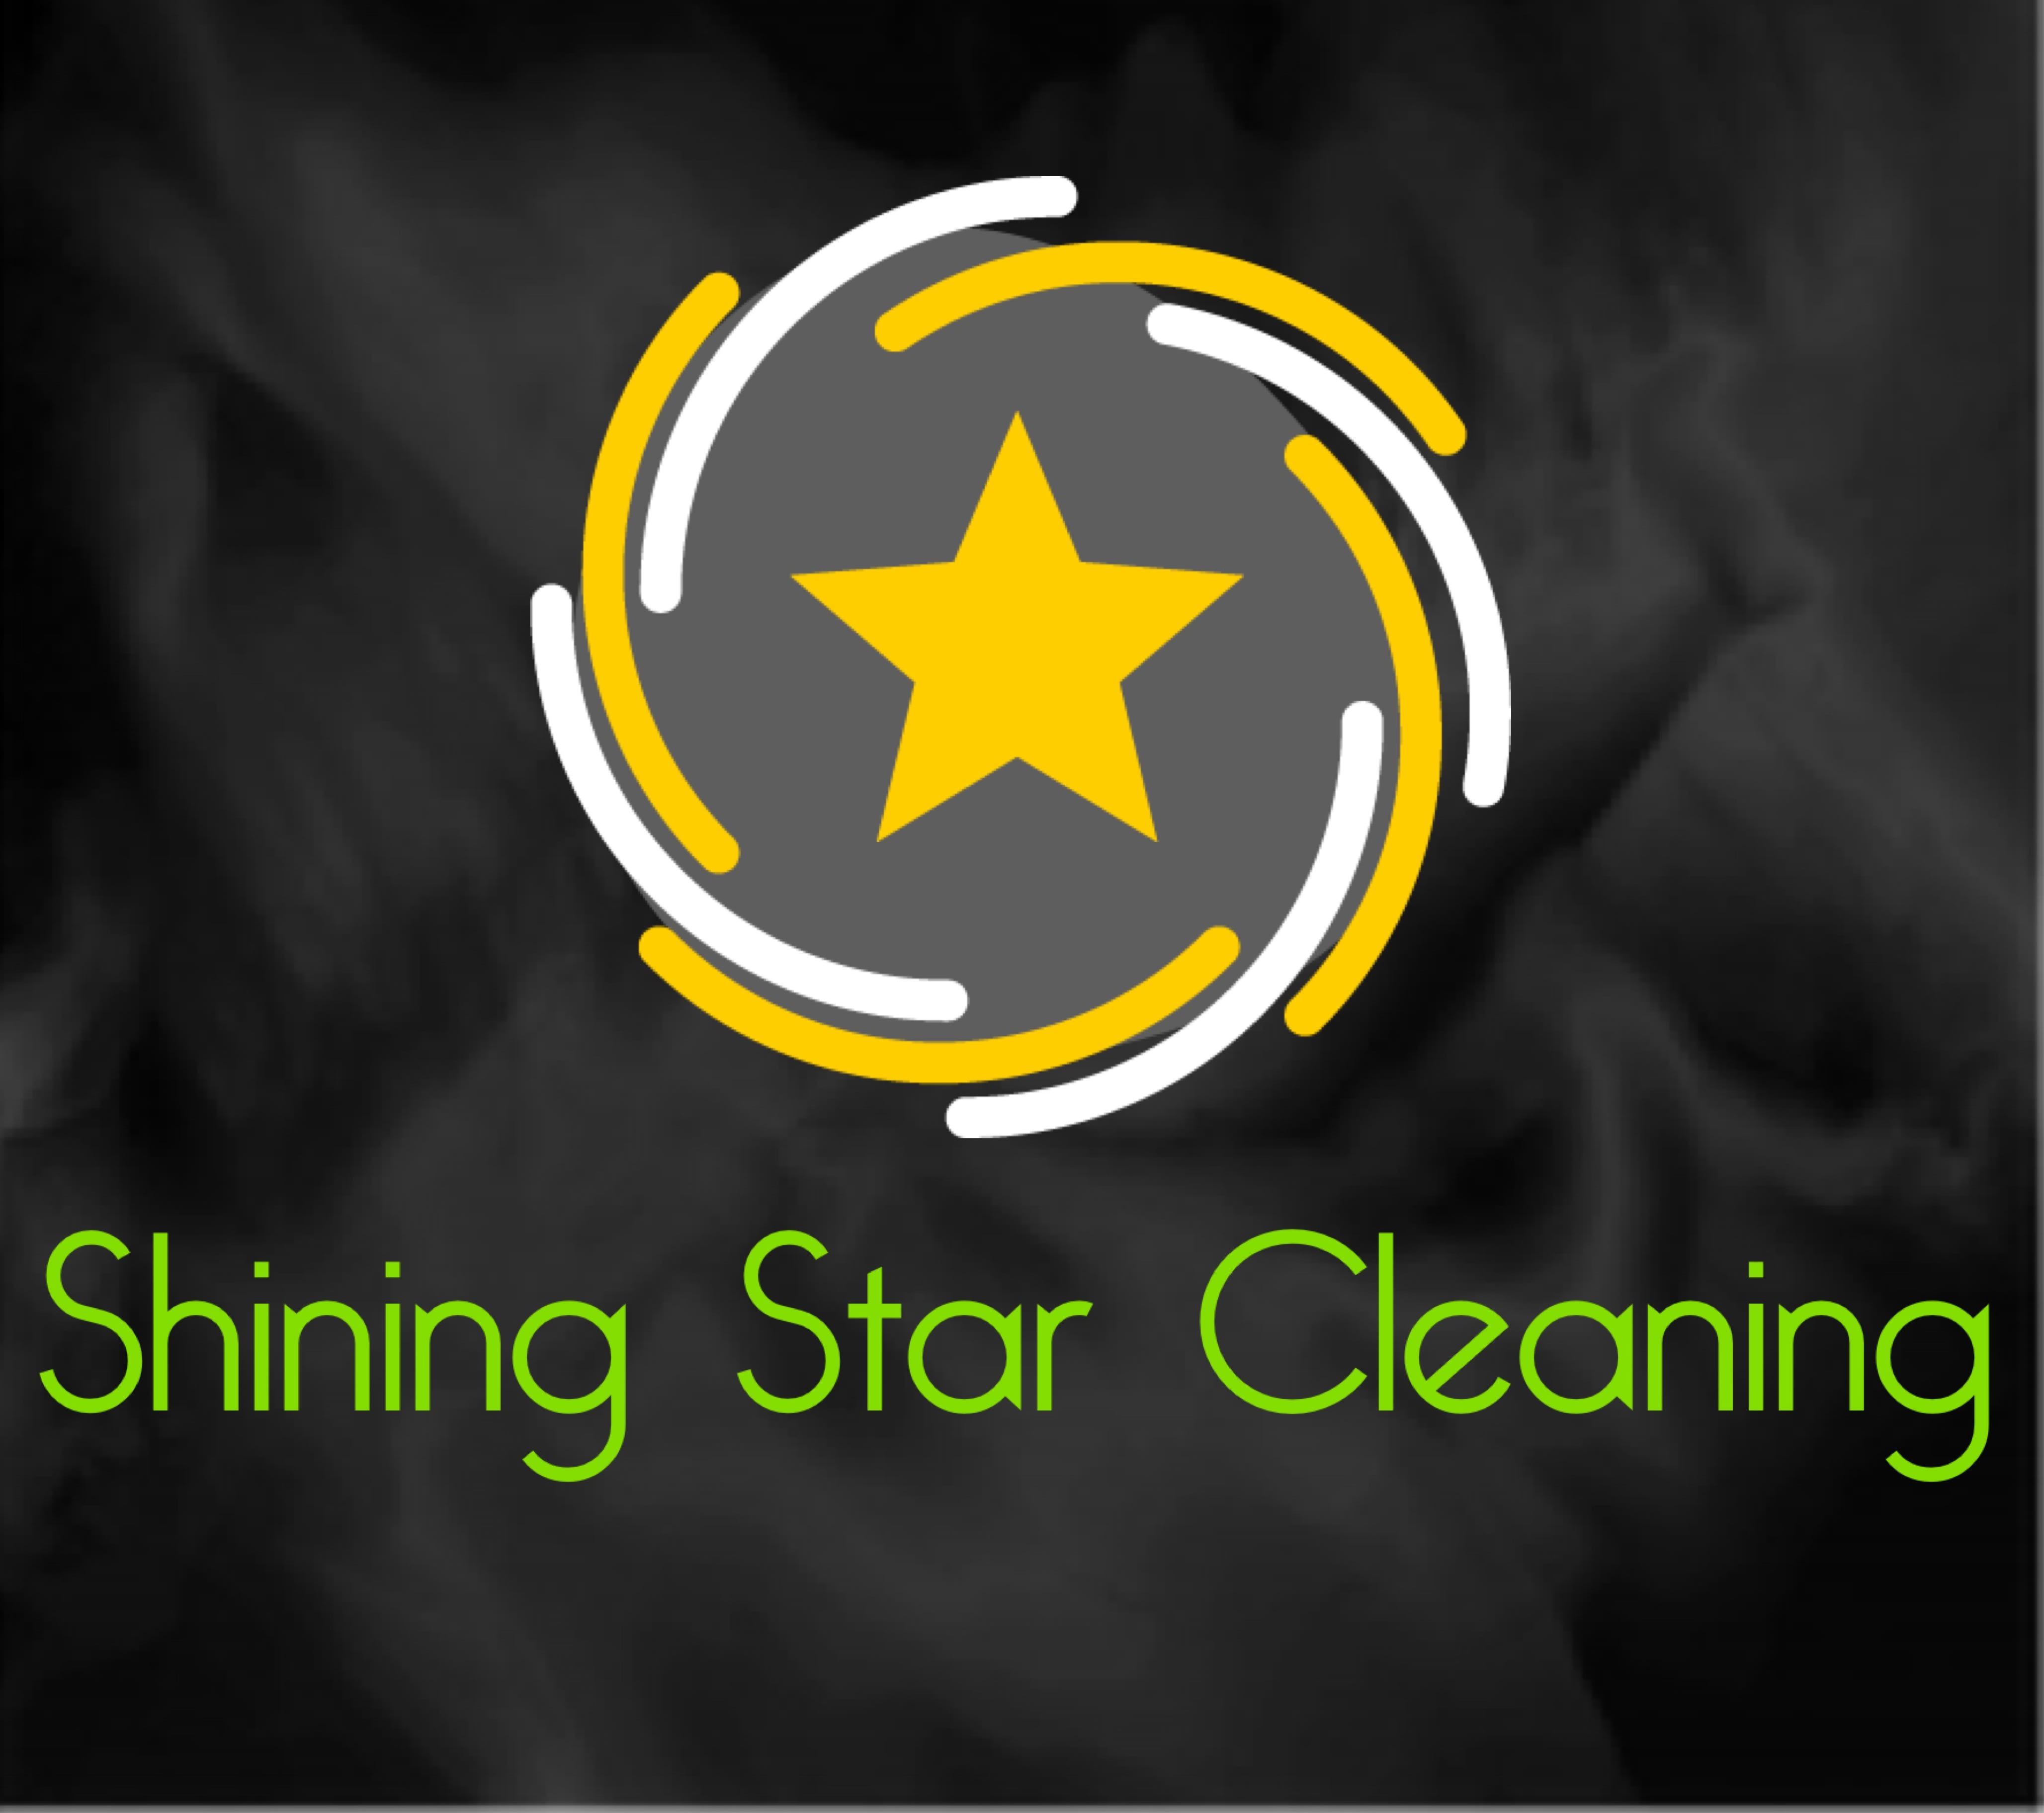 Shining star cleaning